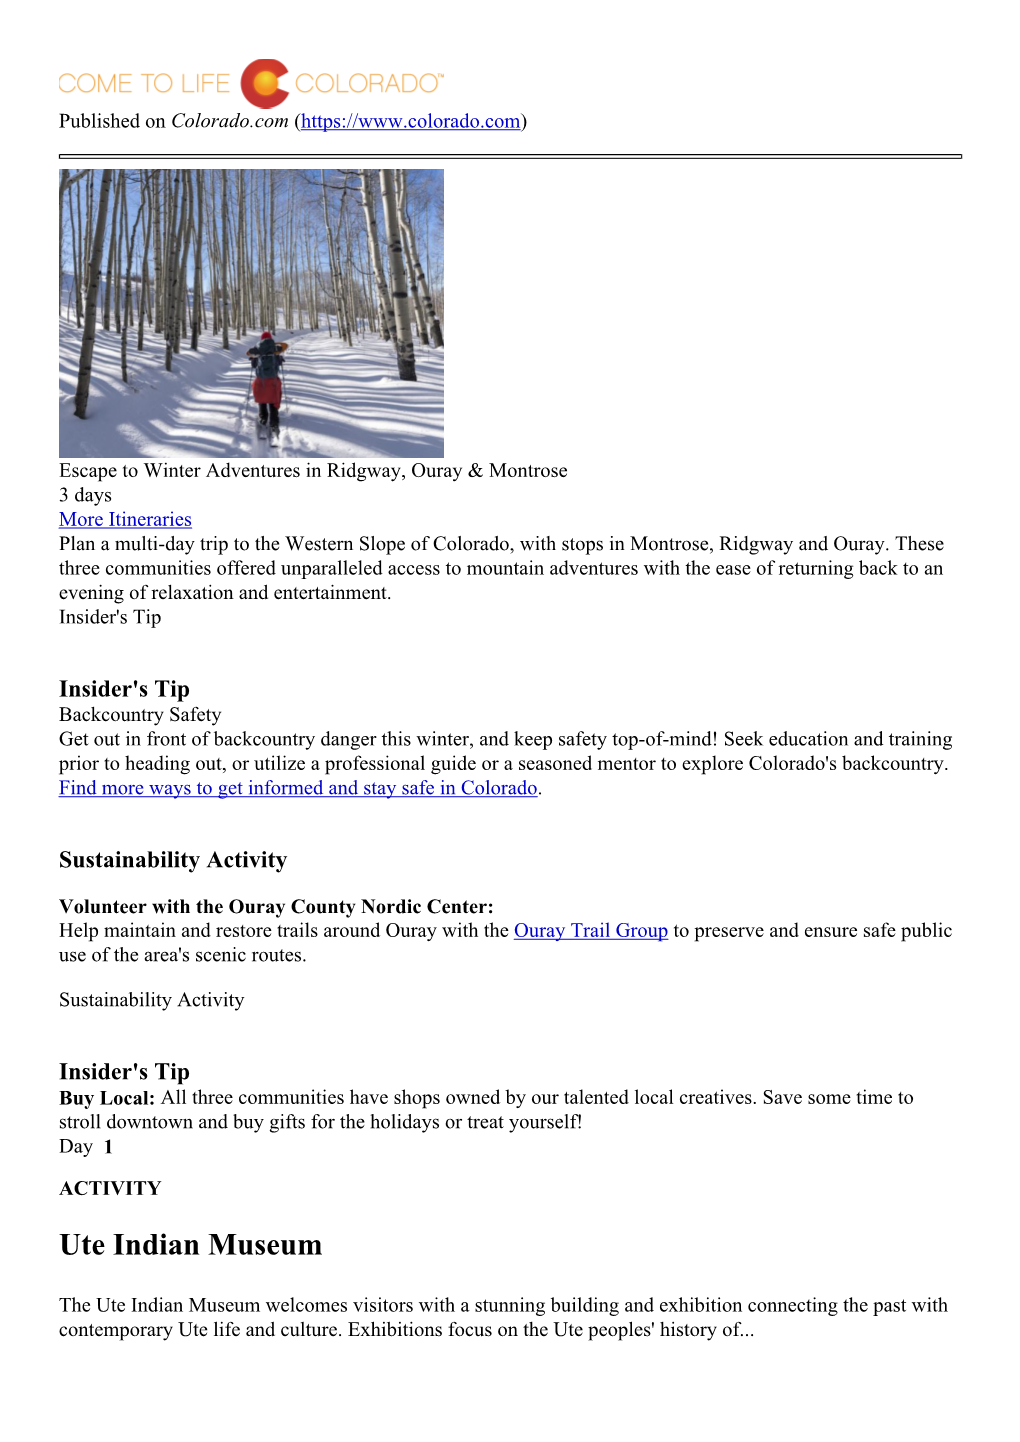 Escape to Winter Adventures in Ridgway, Ouray